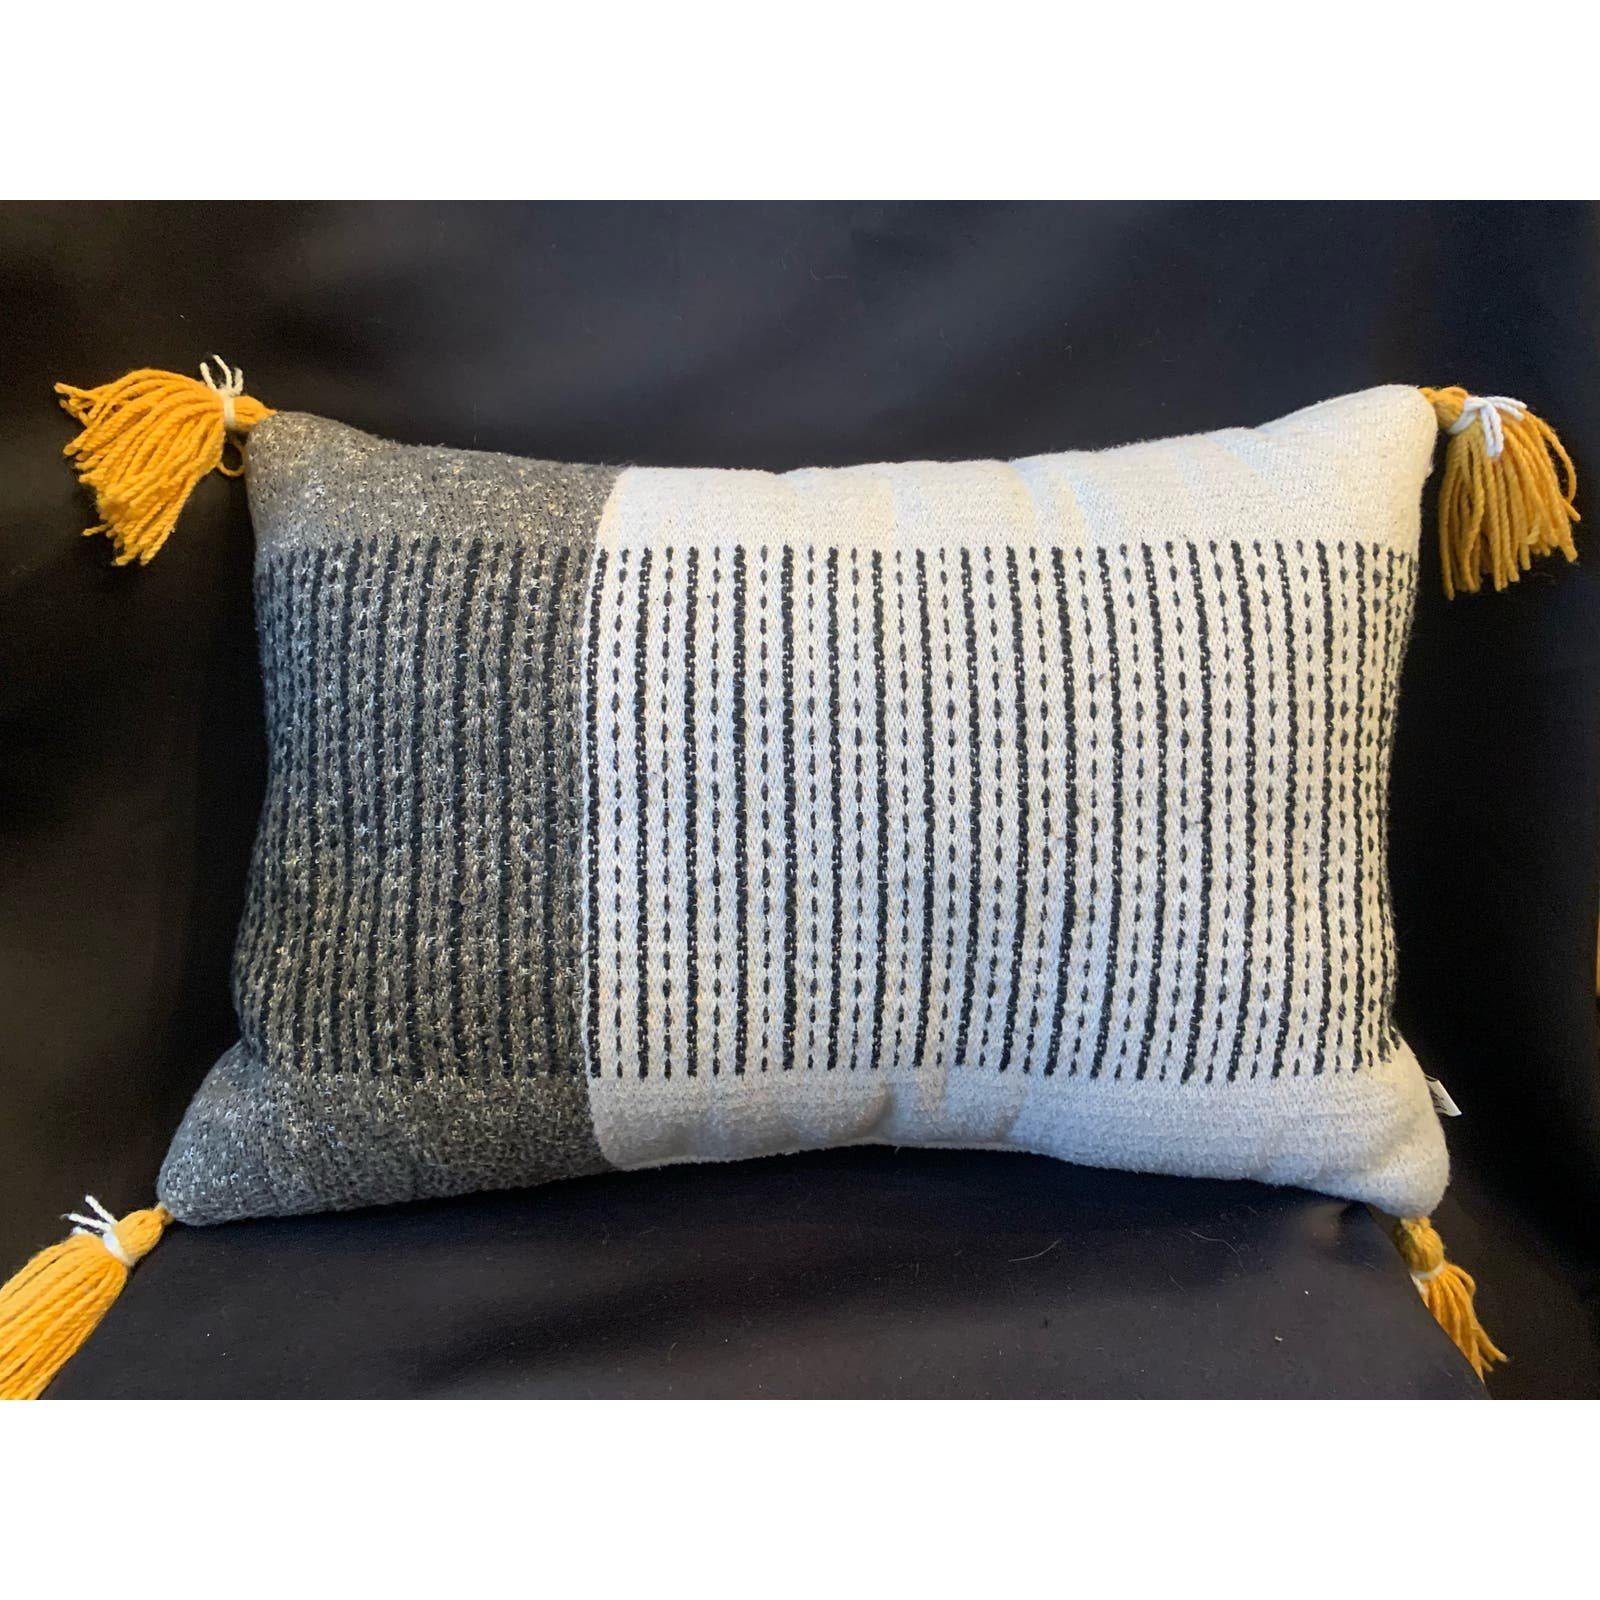 Pillow - Hearth and Hand woven throw pillow cfqY3zcTI